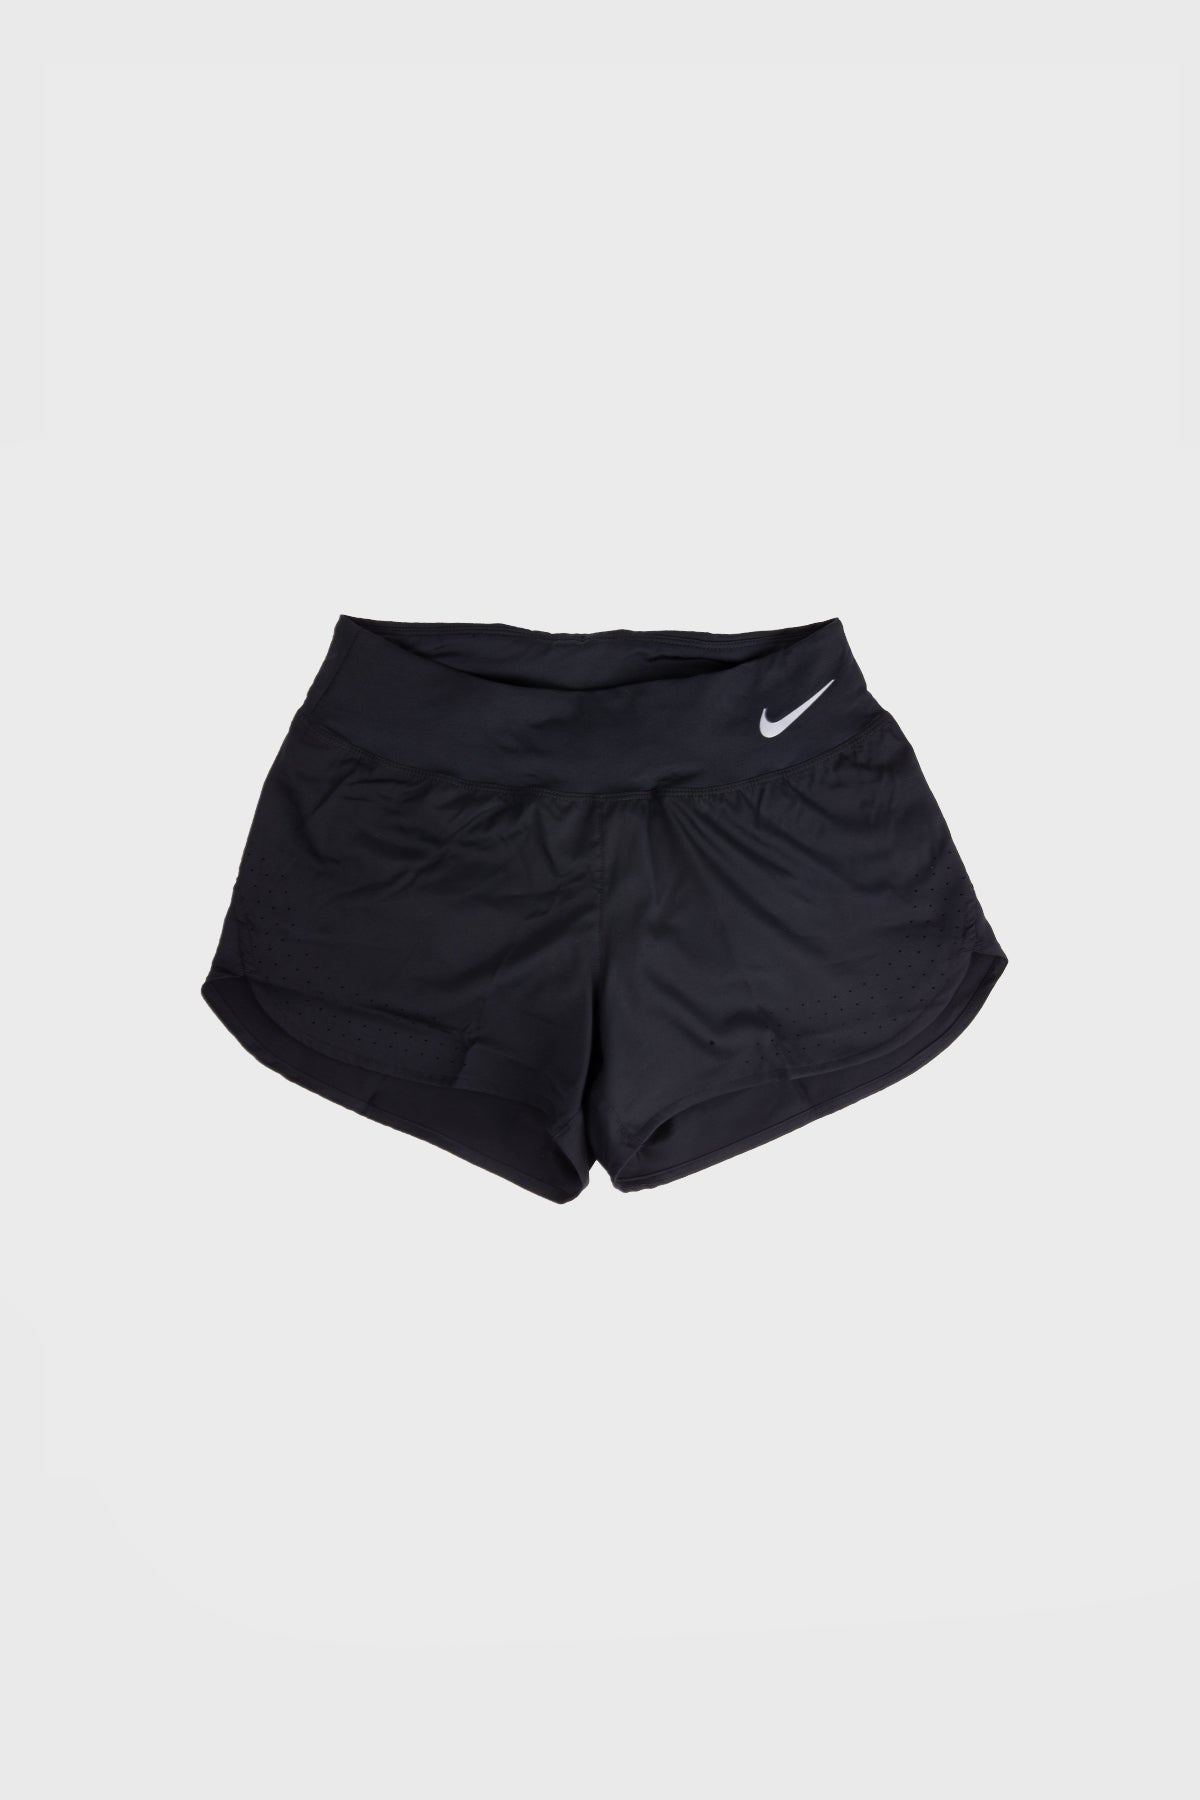 Nike W - Eclipse shorts 3in